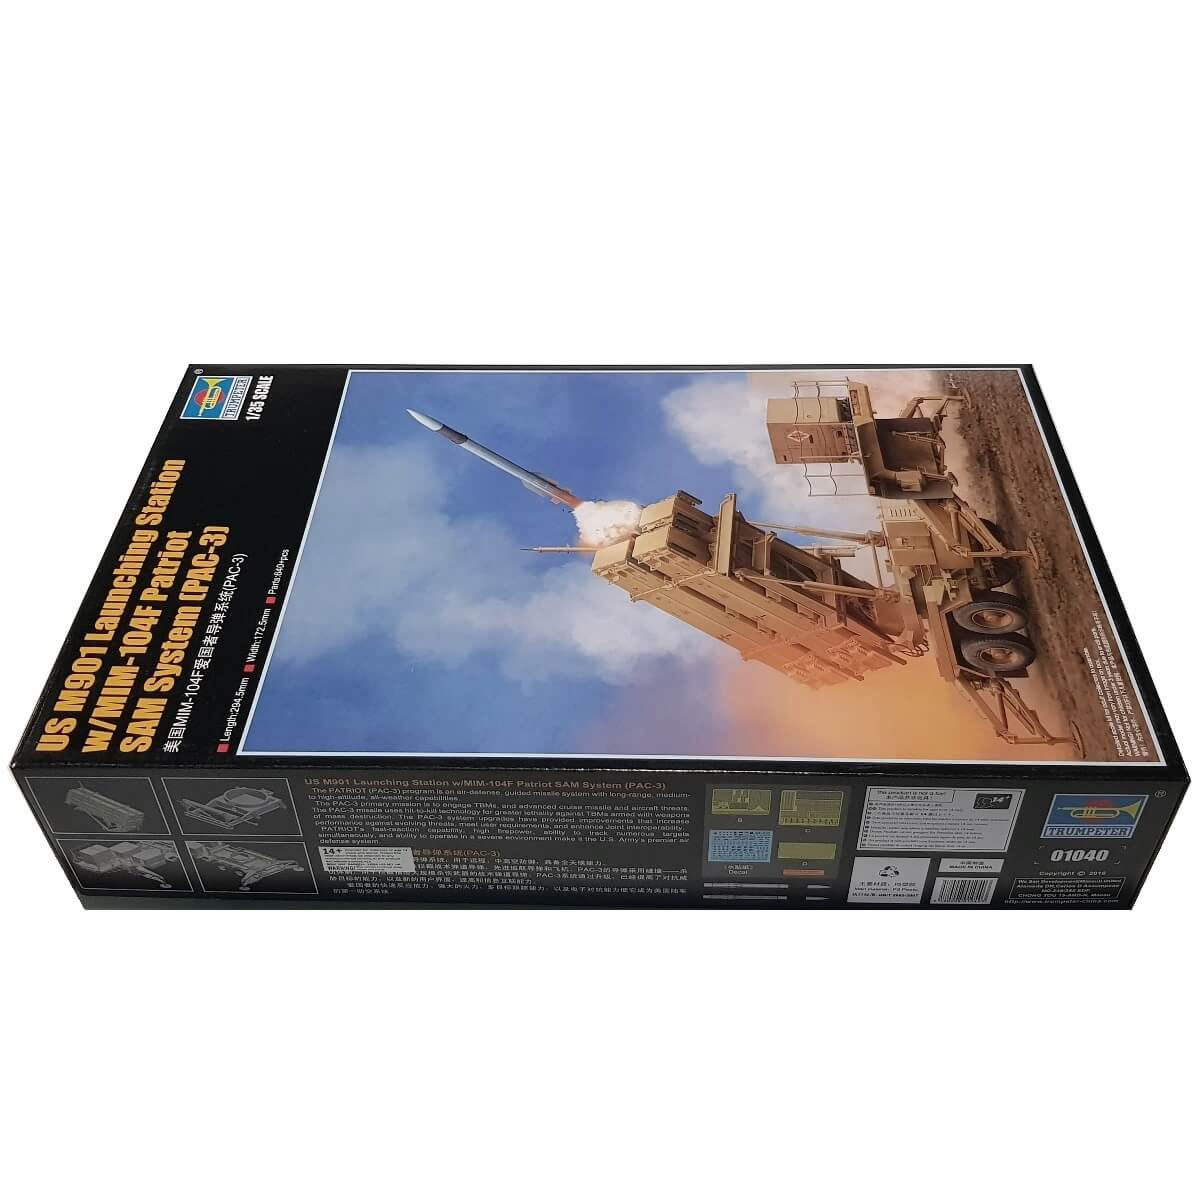 1:35 US M901 Launching Station with MIM-104F Patriot SAM System (PAC-3) - TRUMPETER